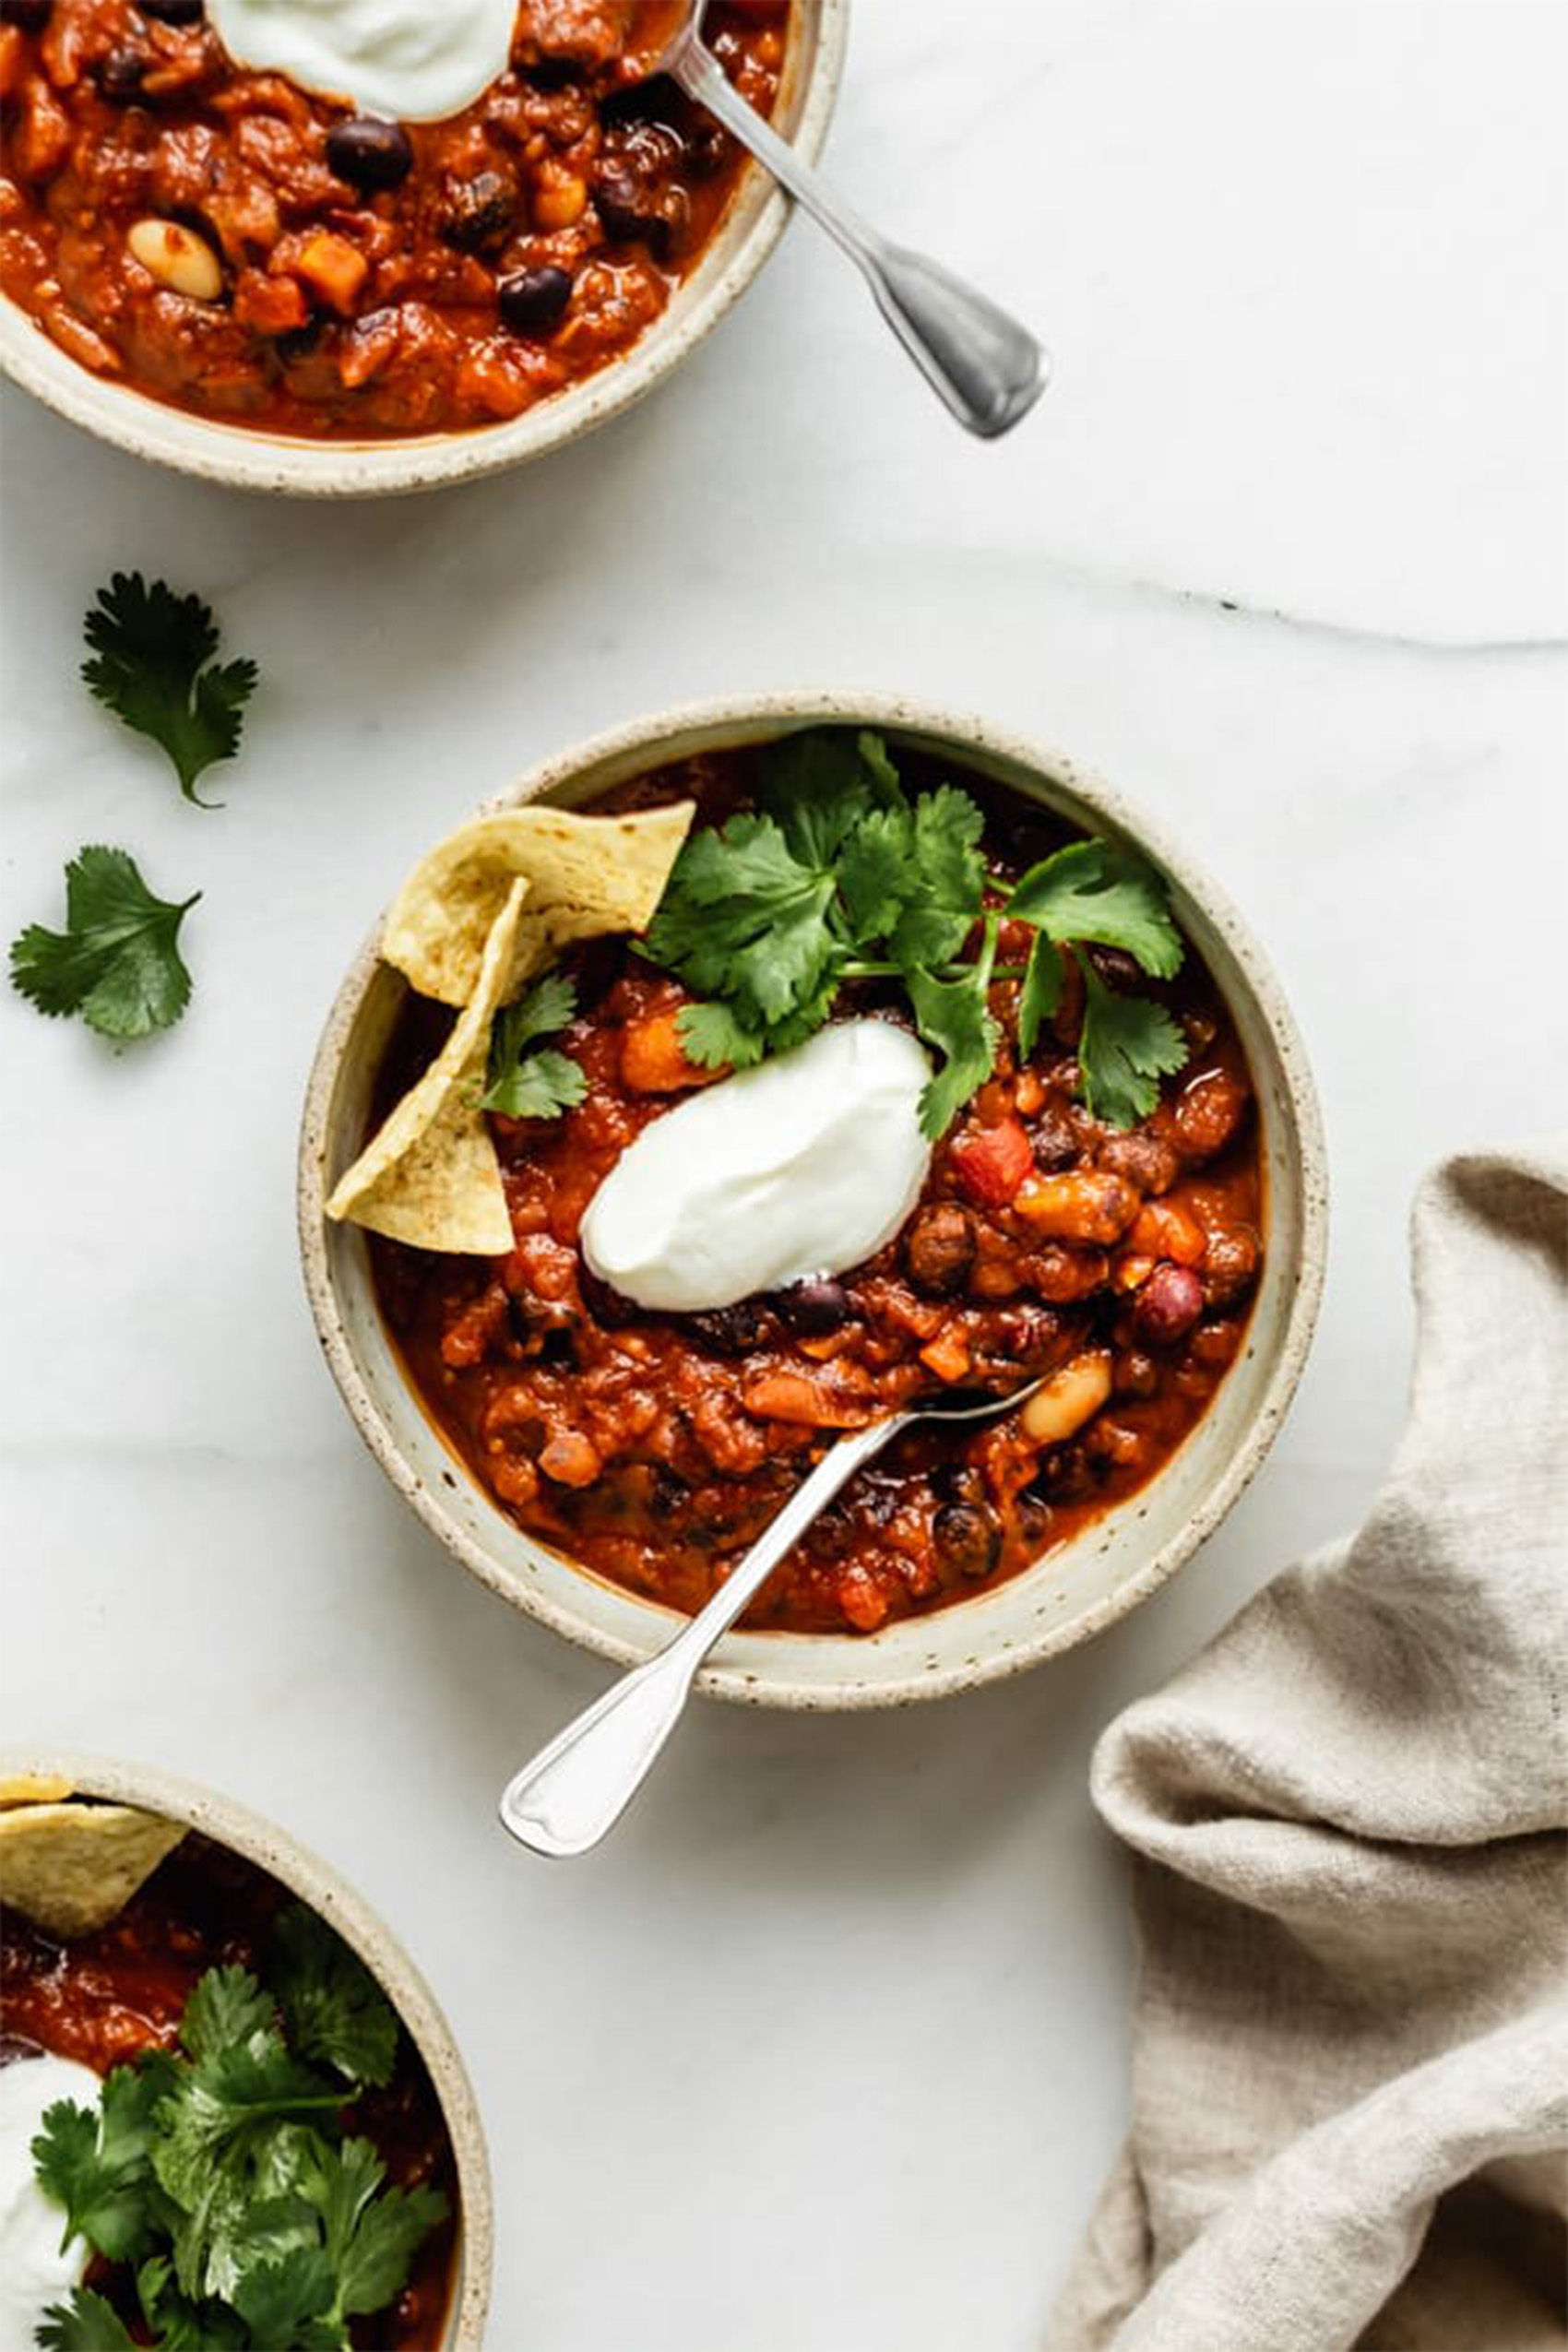 a bowl of vegetarian chili served with tortilla chips, sour cream and herbs